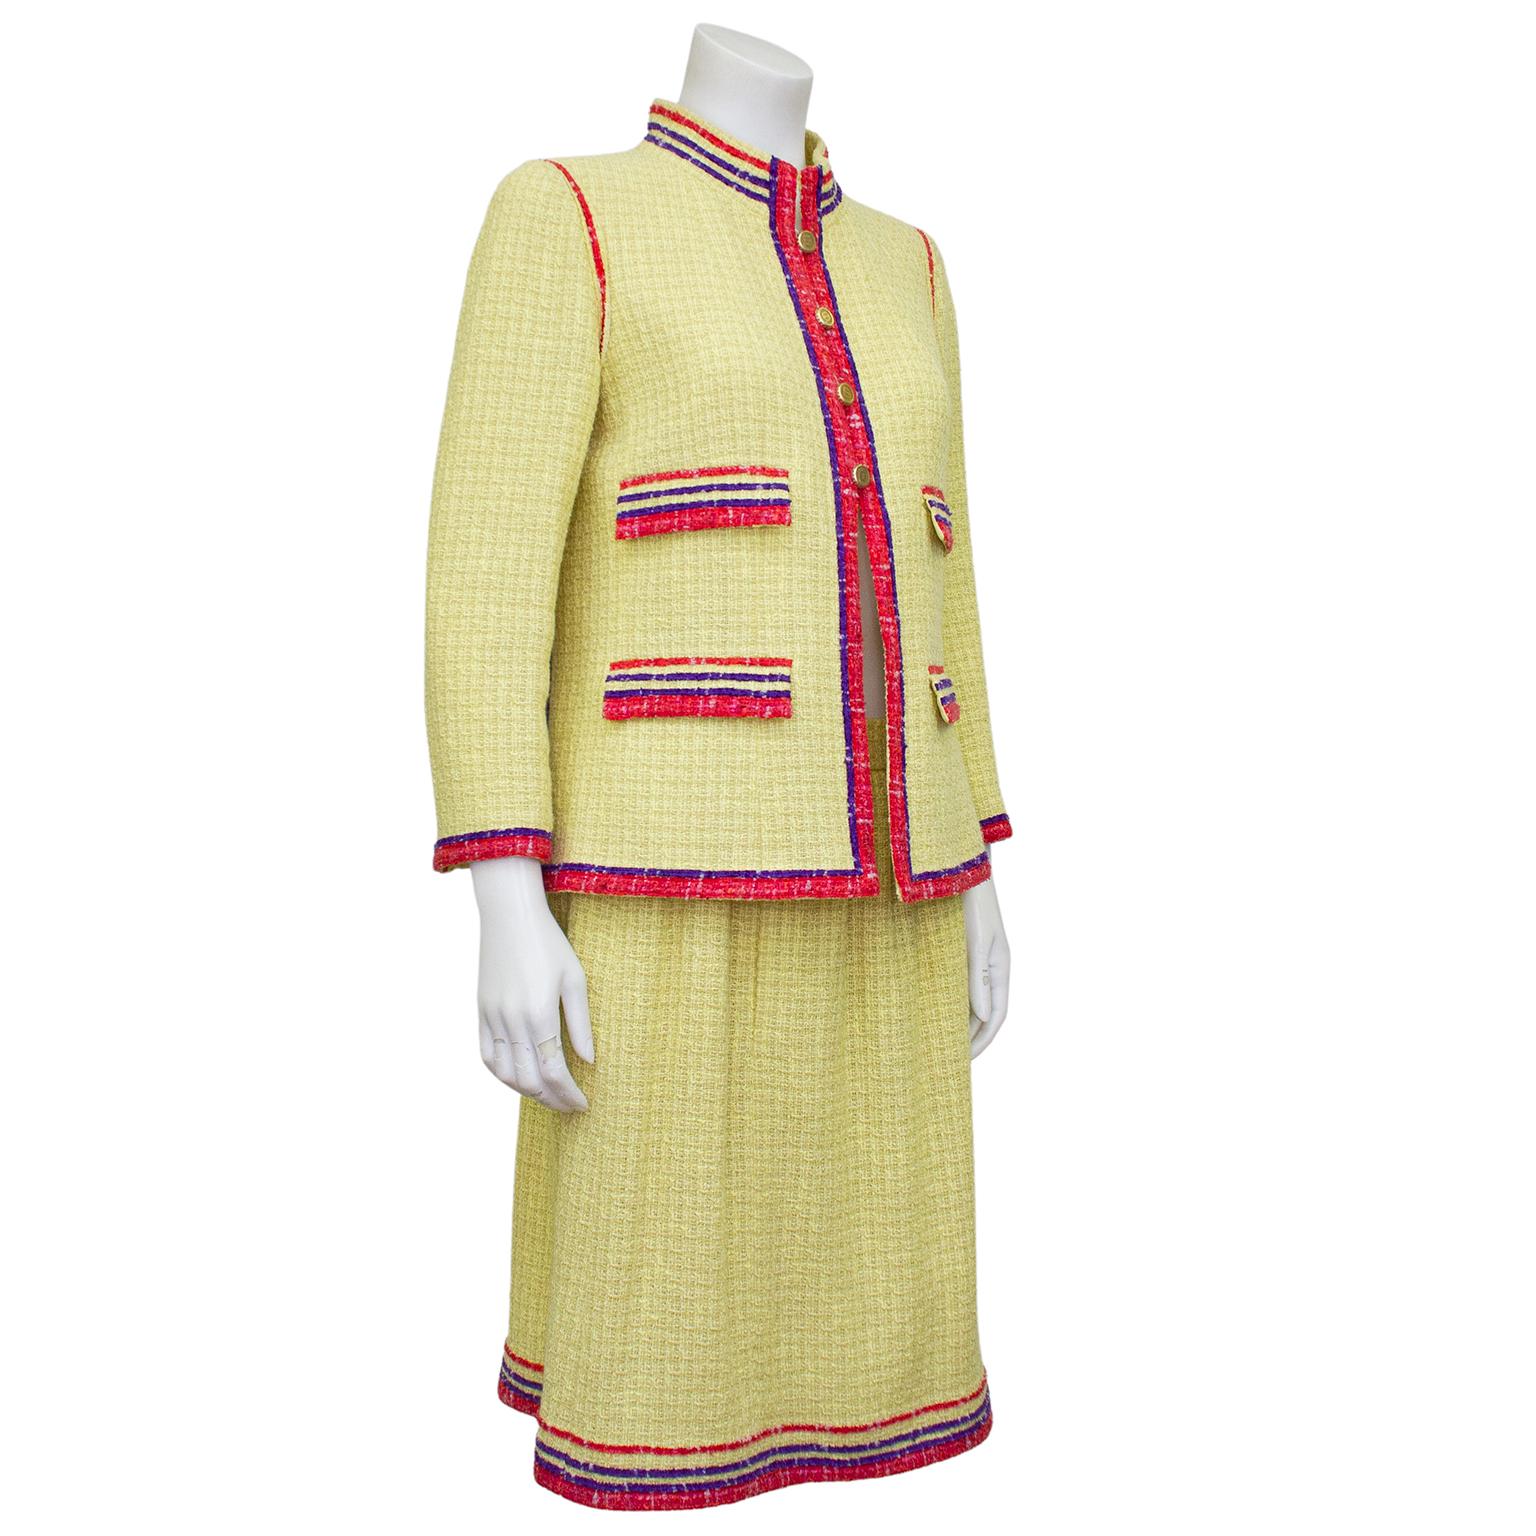 Beautiful Chanel jacket and skirt suit from the Spring 2006 collection. Yellow tweed with pink/red and purple trim. The long jacket is a gorgeous shape featuring a Mandarin collar and bracelet length sleeves. Four gold tone metal CC logo scallop